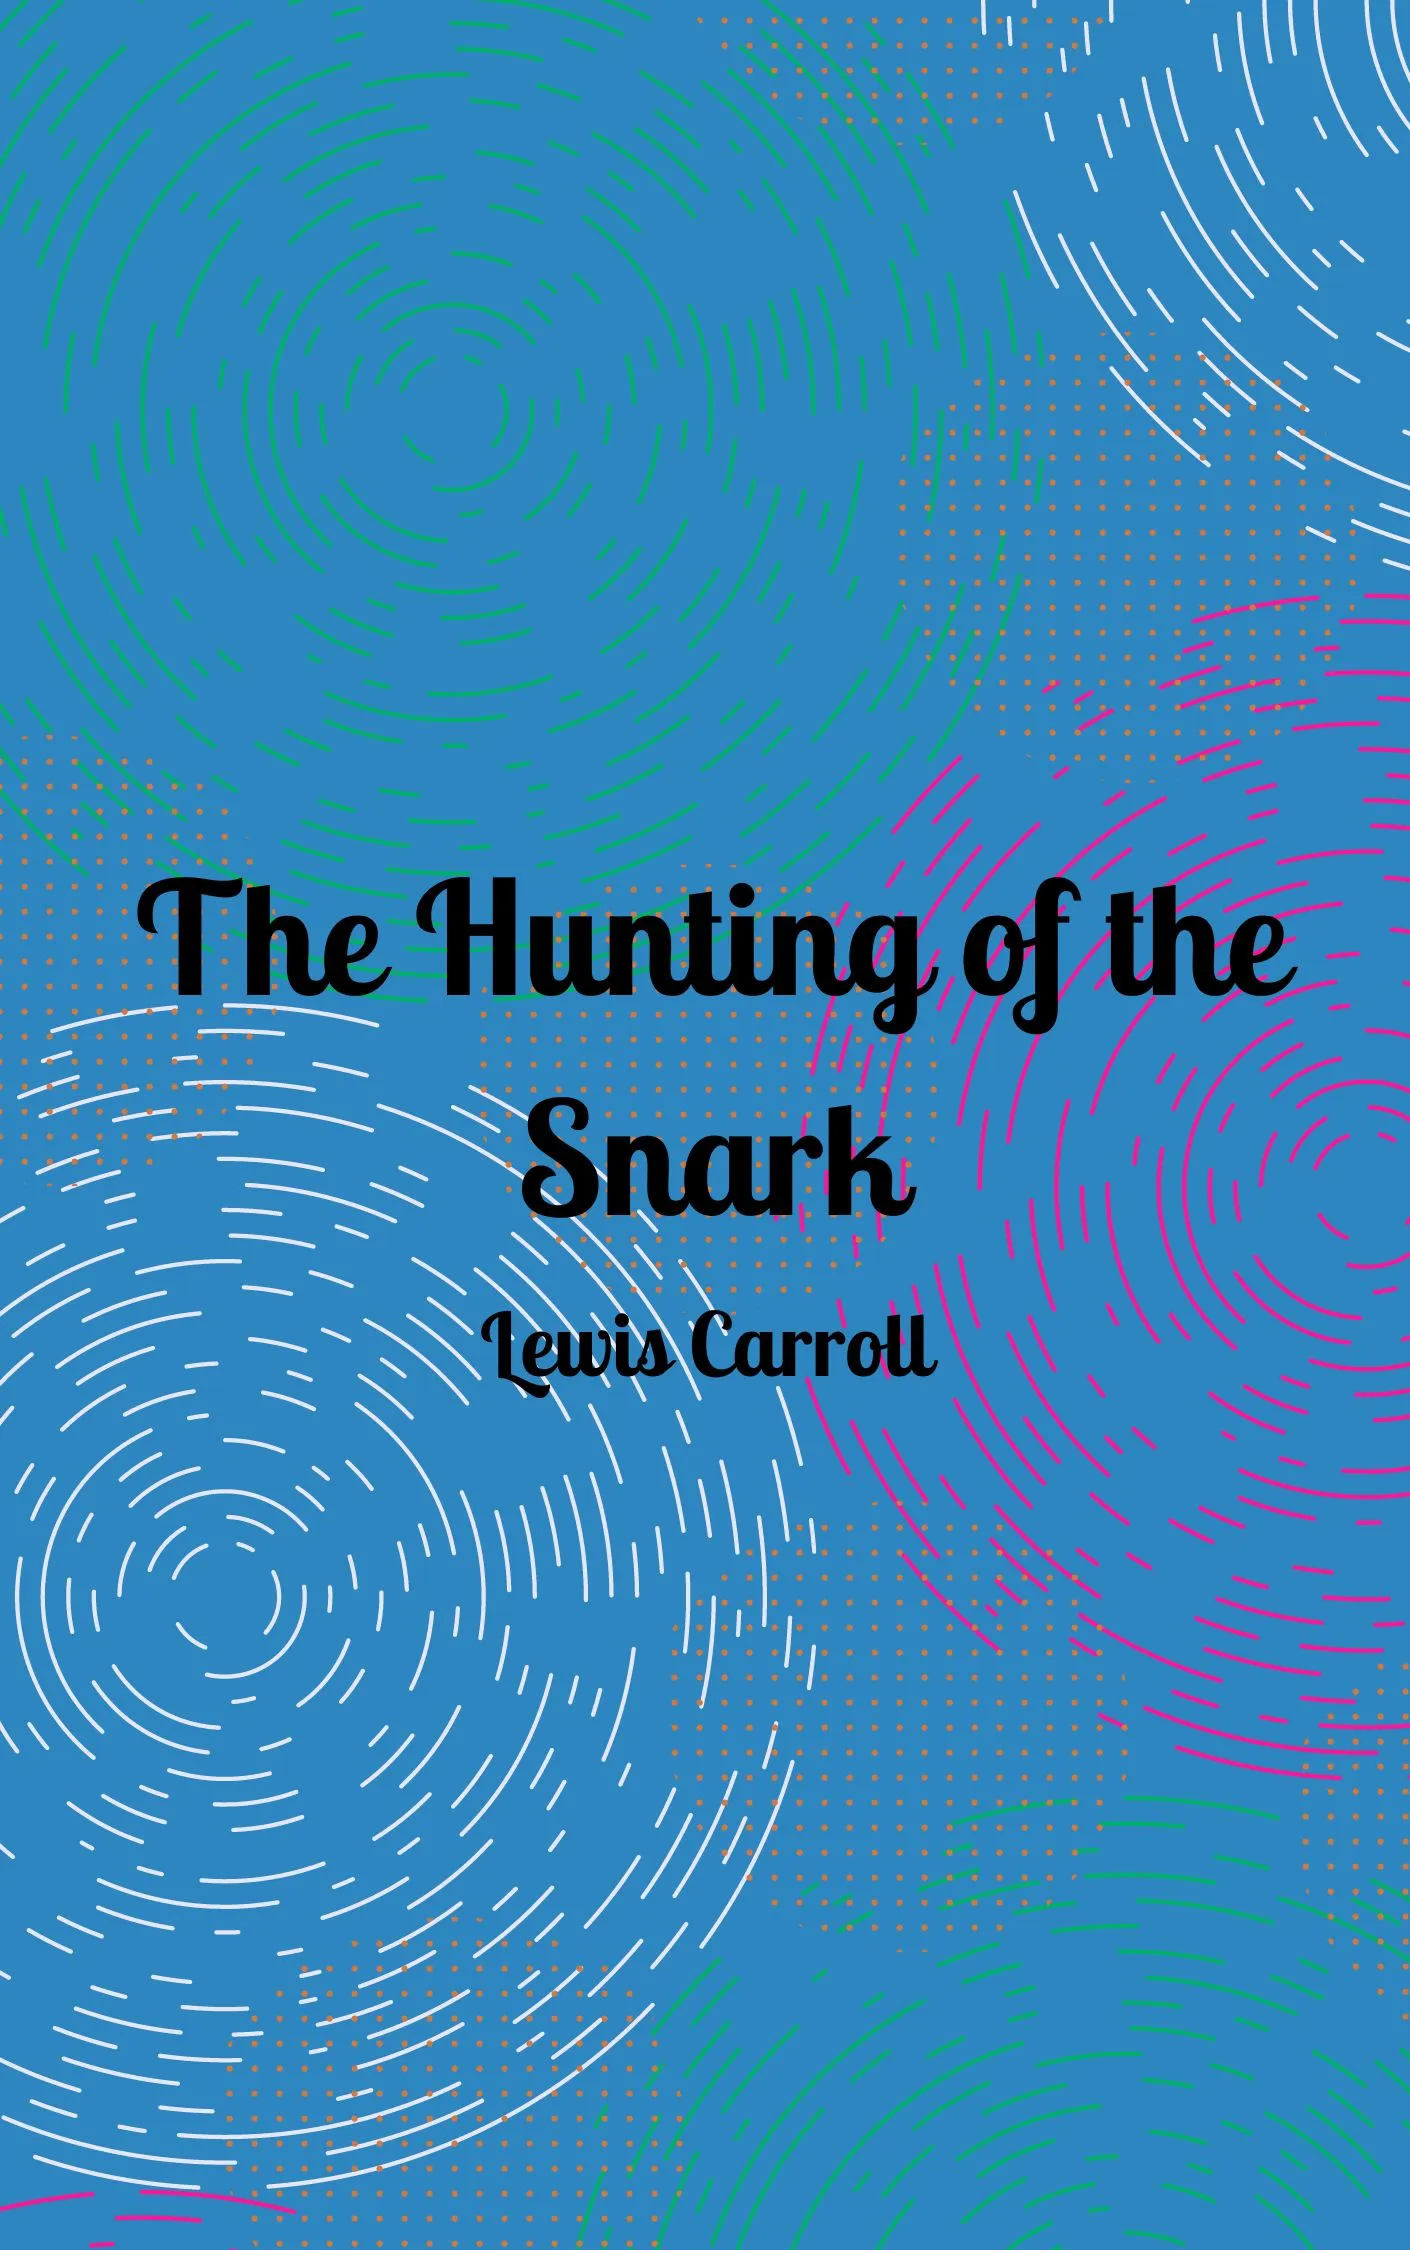 The Hunting of the Snark by Lewis Carroll Audiobook